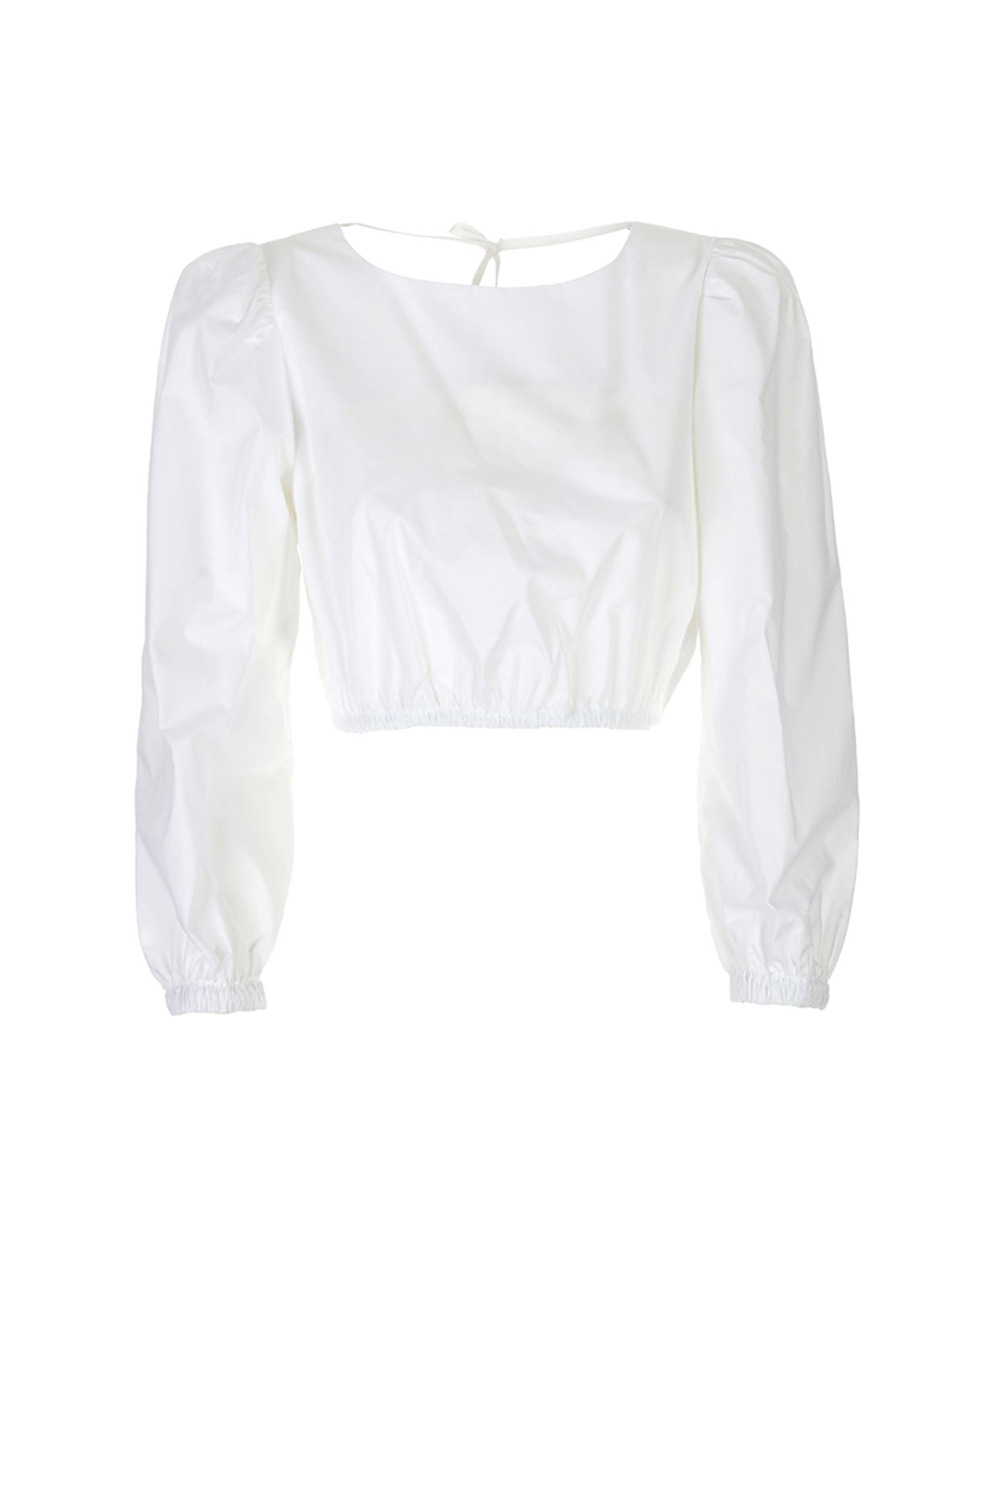 Cropped top in parachute canvas - Skills & Genes